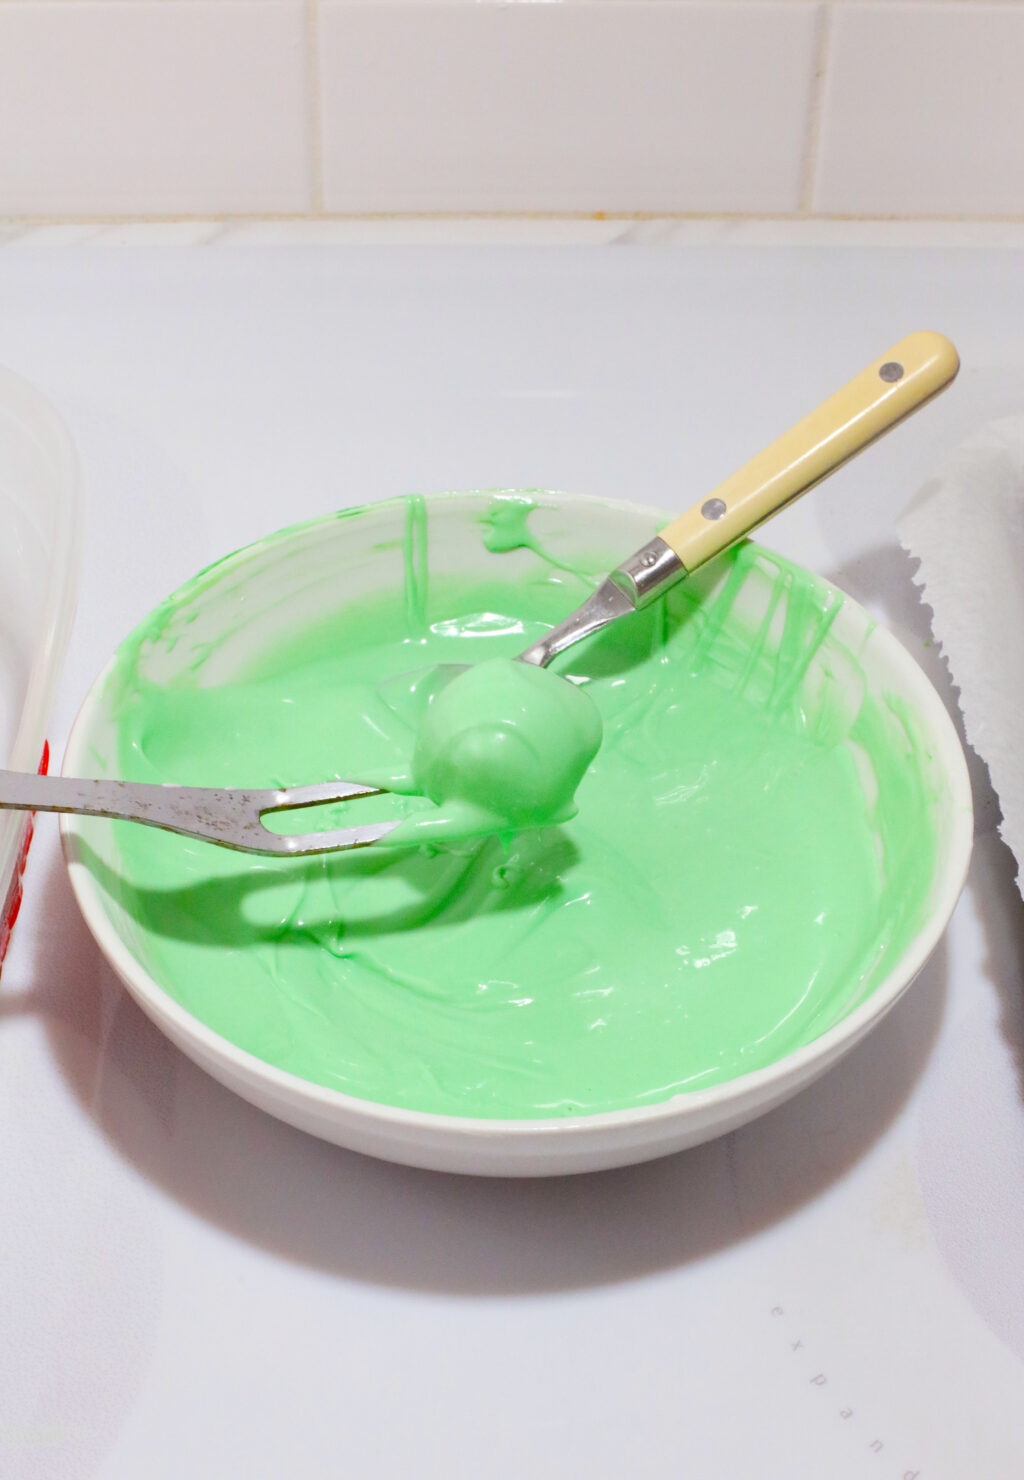 peanut butter balls being dipped into green colored chocolate